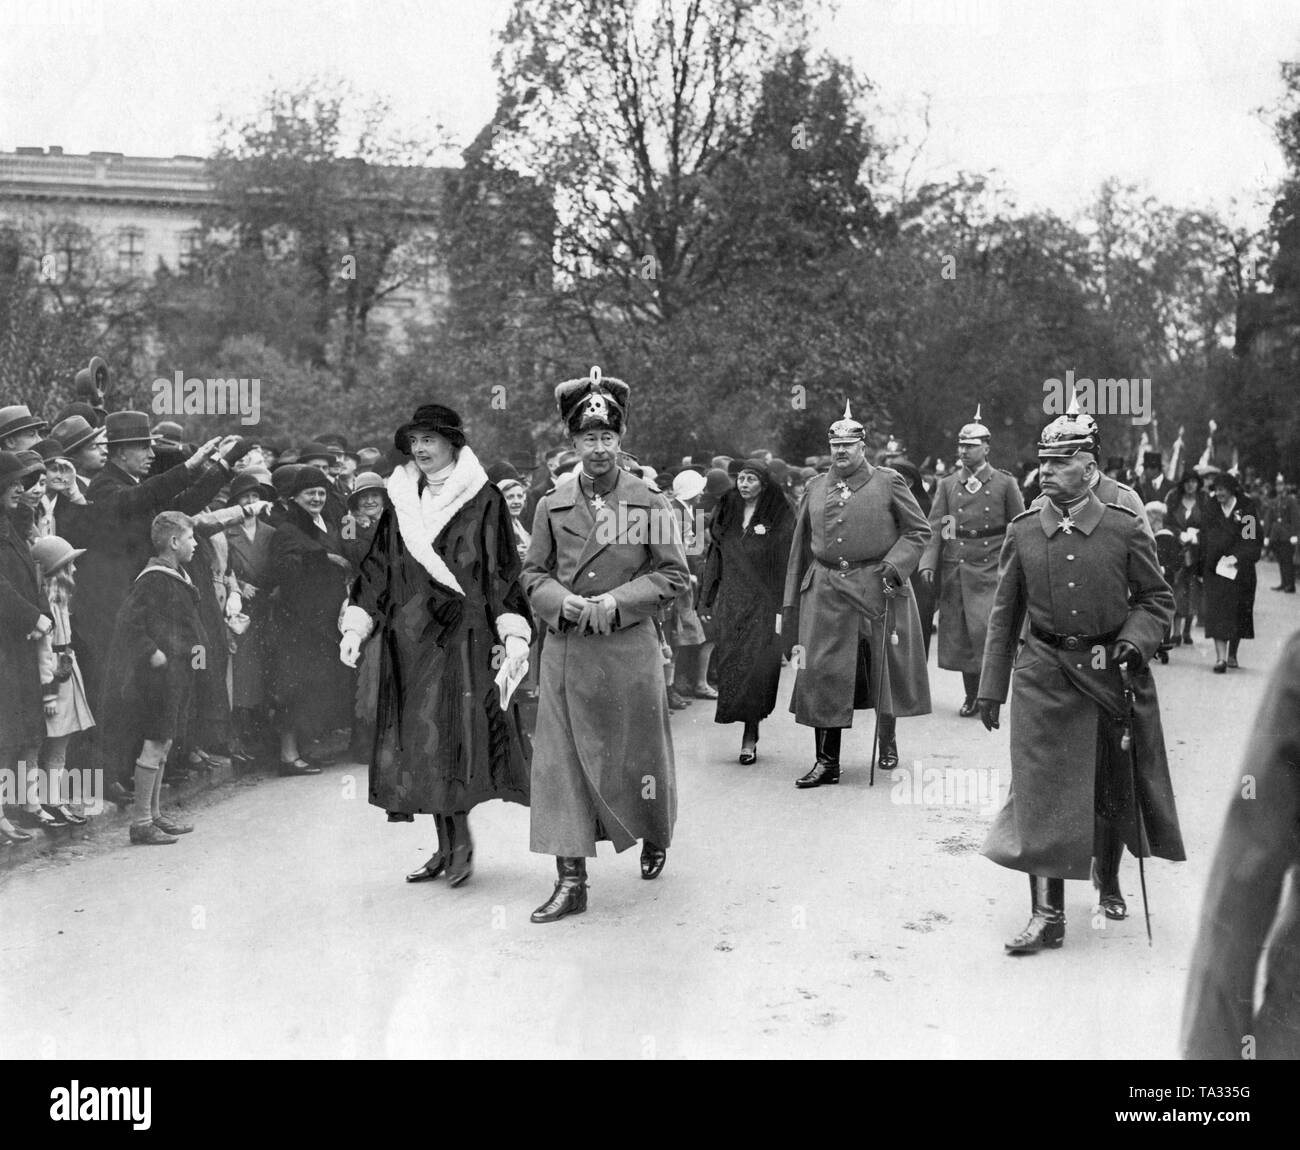 Crown Princess Cecilie of Mecklenburg (1st row left) and Crown Prince Wilhelm of Prussia (1st row middle) on the way to the service in the Peace Church in Berlin. They are accompanied, inter alia, by Sophie Charlotte of Oldenburg (2nd row left), her husband Prince Eitel Friedrich of Prussia (2nd row right), Countess Ina Marie von Bassewitz (3rd row left), her husband Prince Oscar of Prussia (3rd row right). Stock Photo